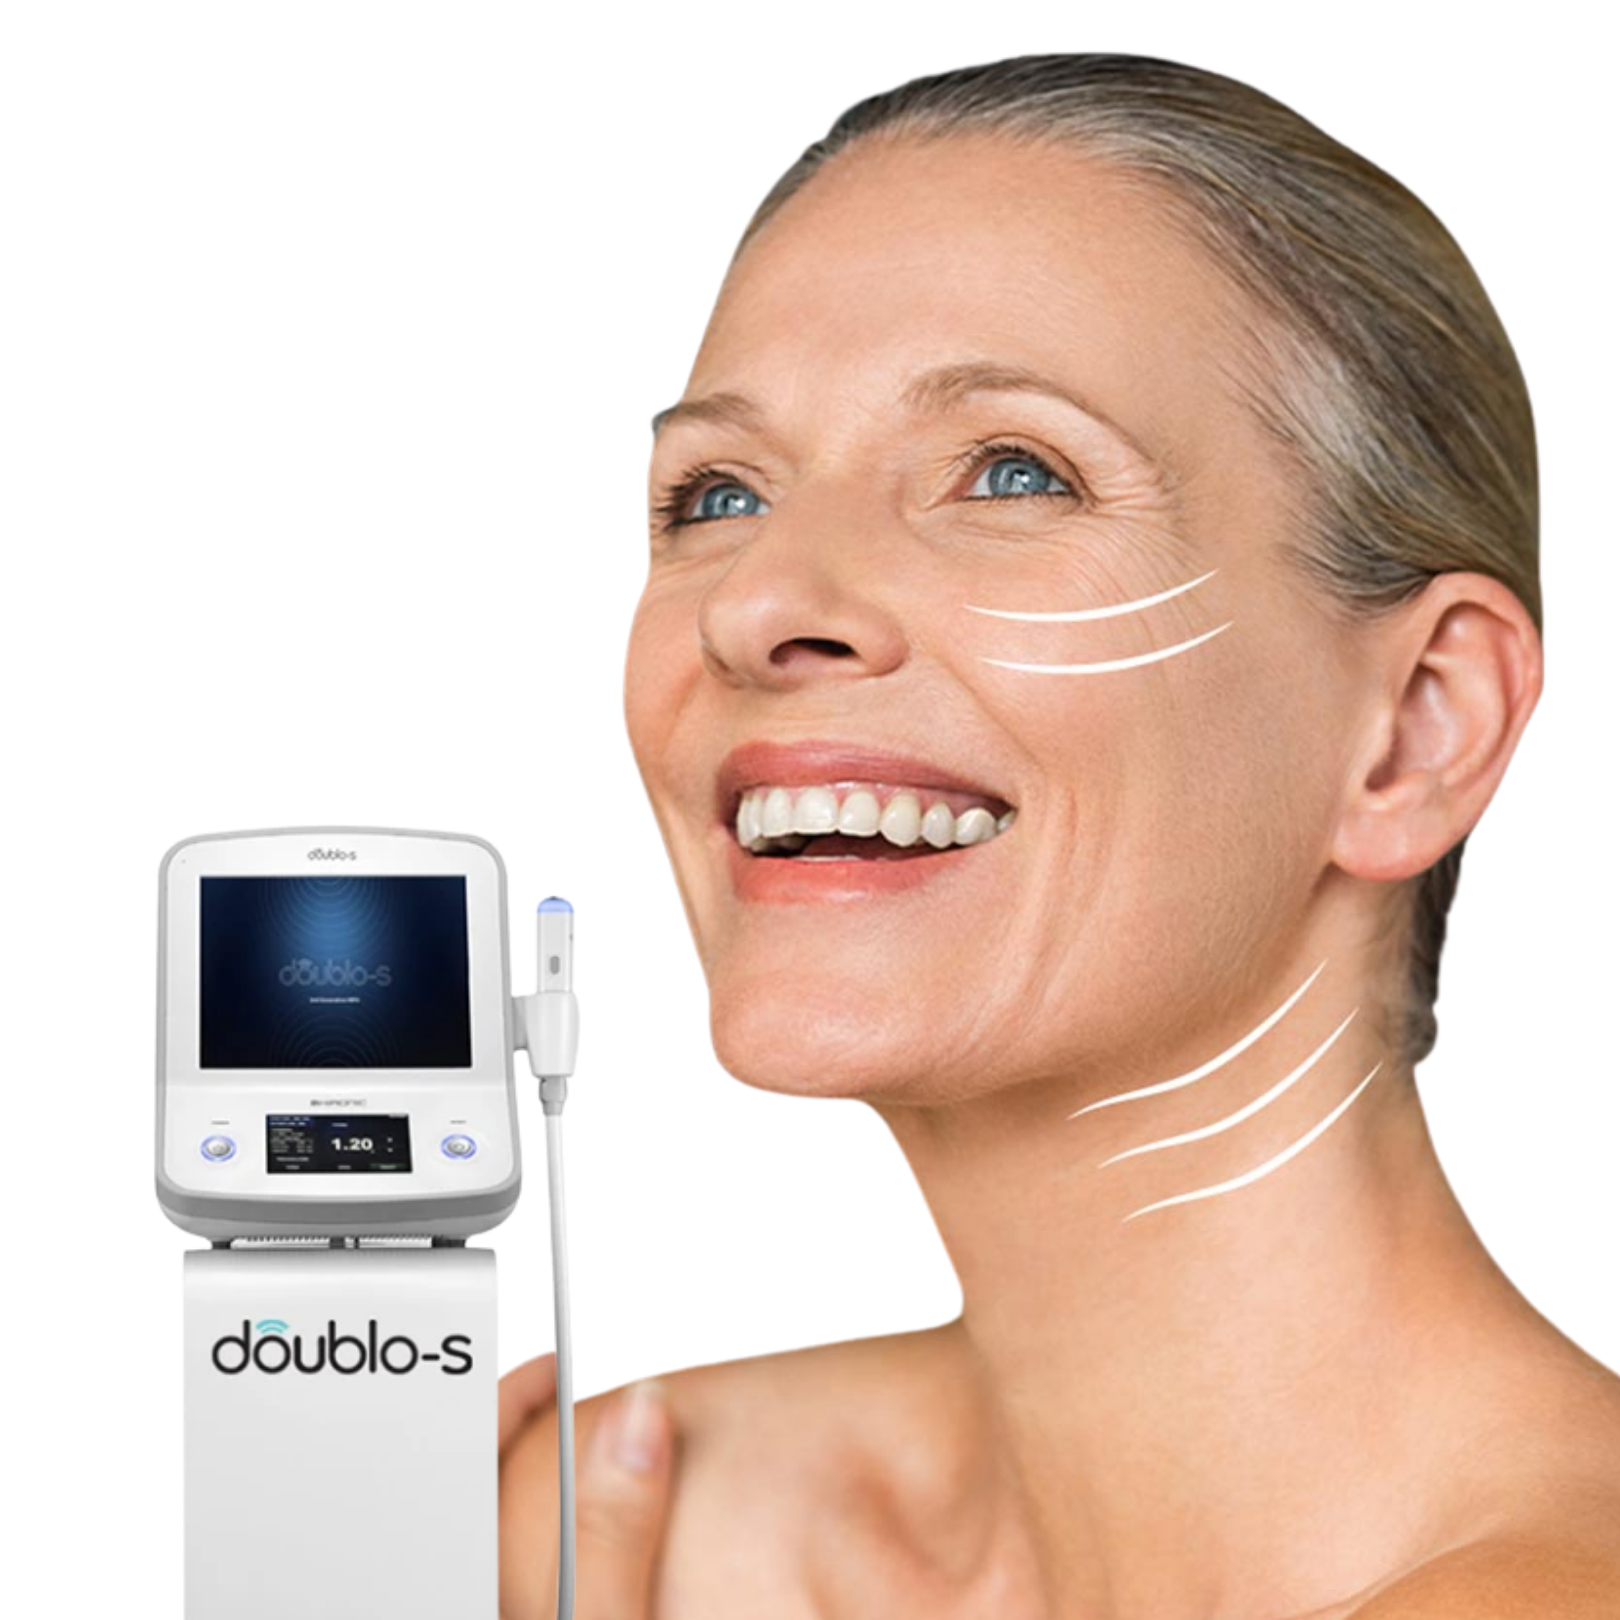 Doublo is a skin tightening treatment which utilises HIFU (High Intensity Focused Ultrasound). Book now Belfast and Newry